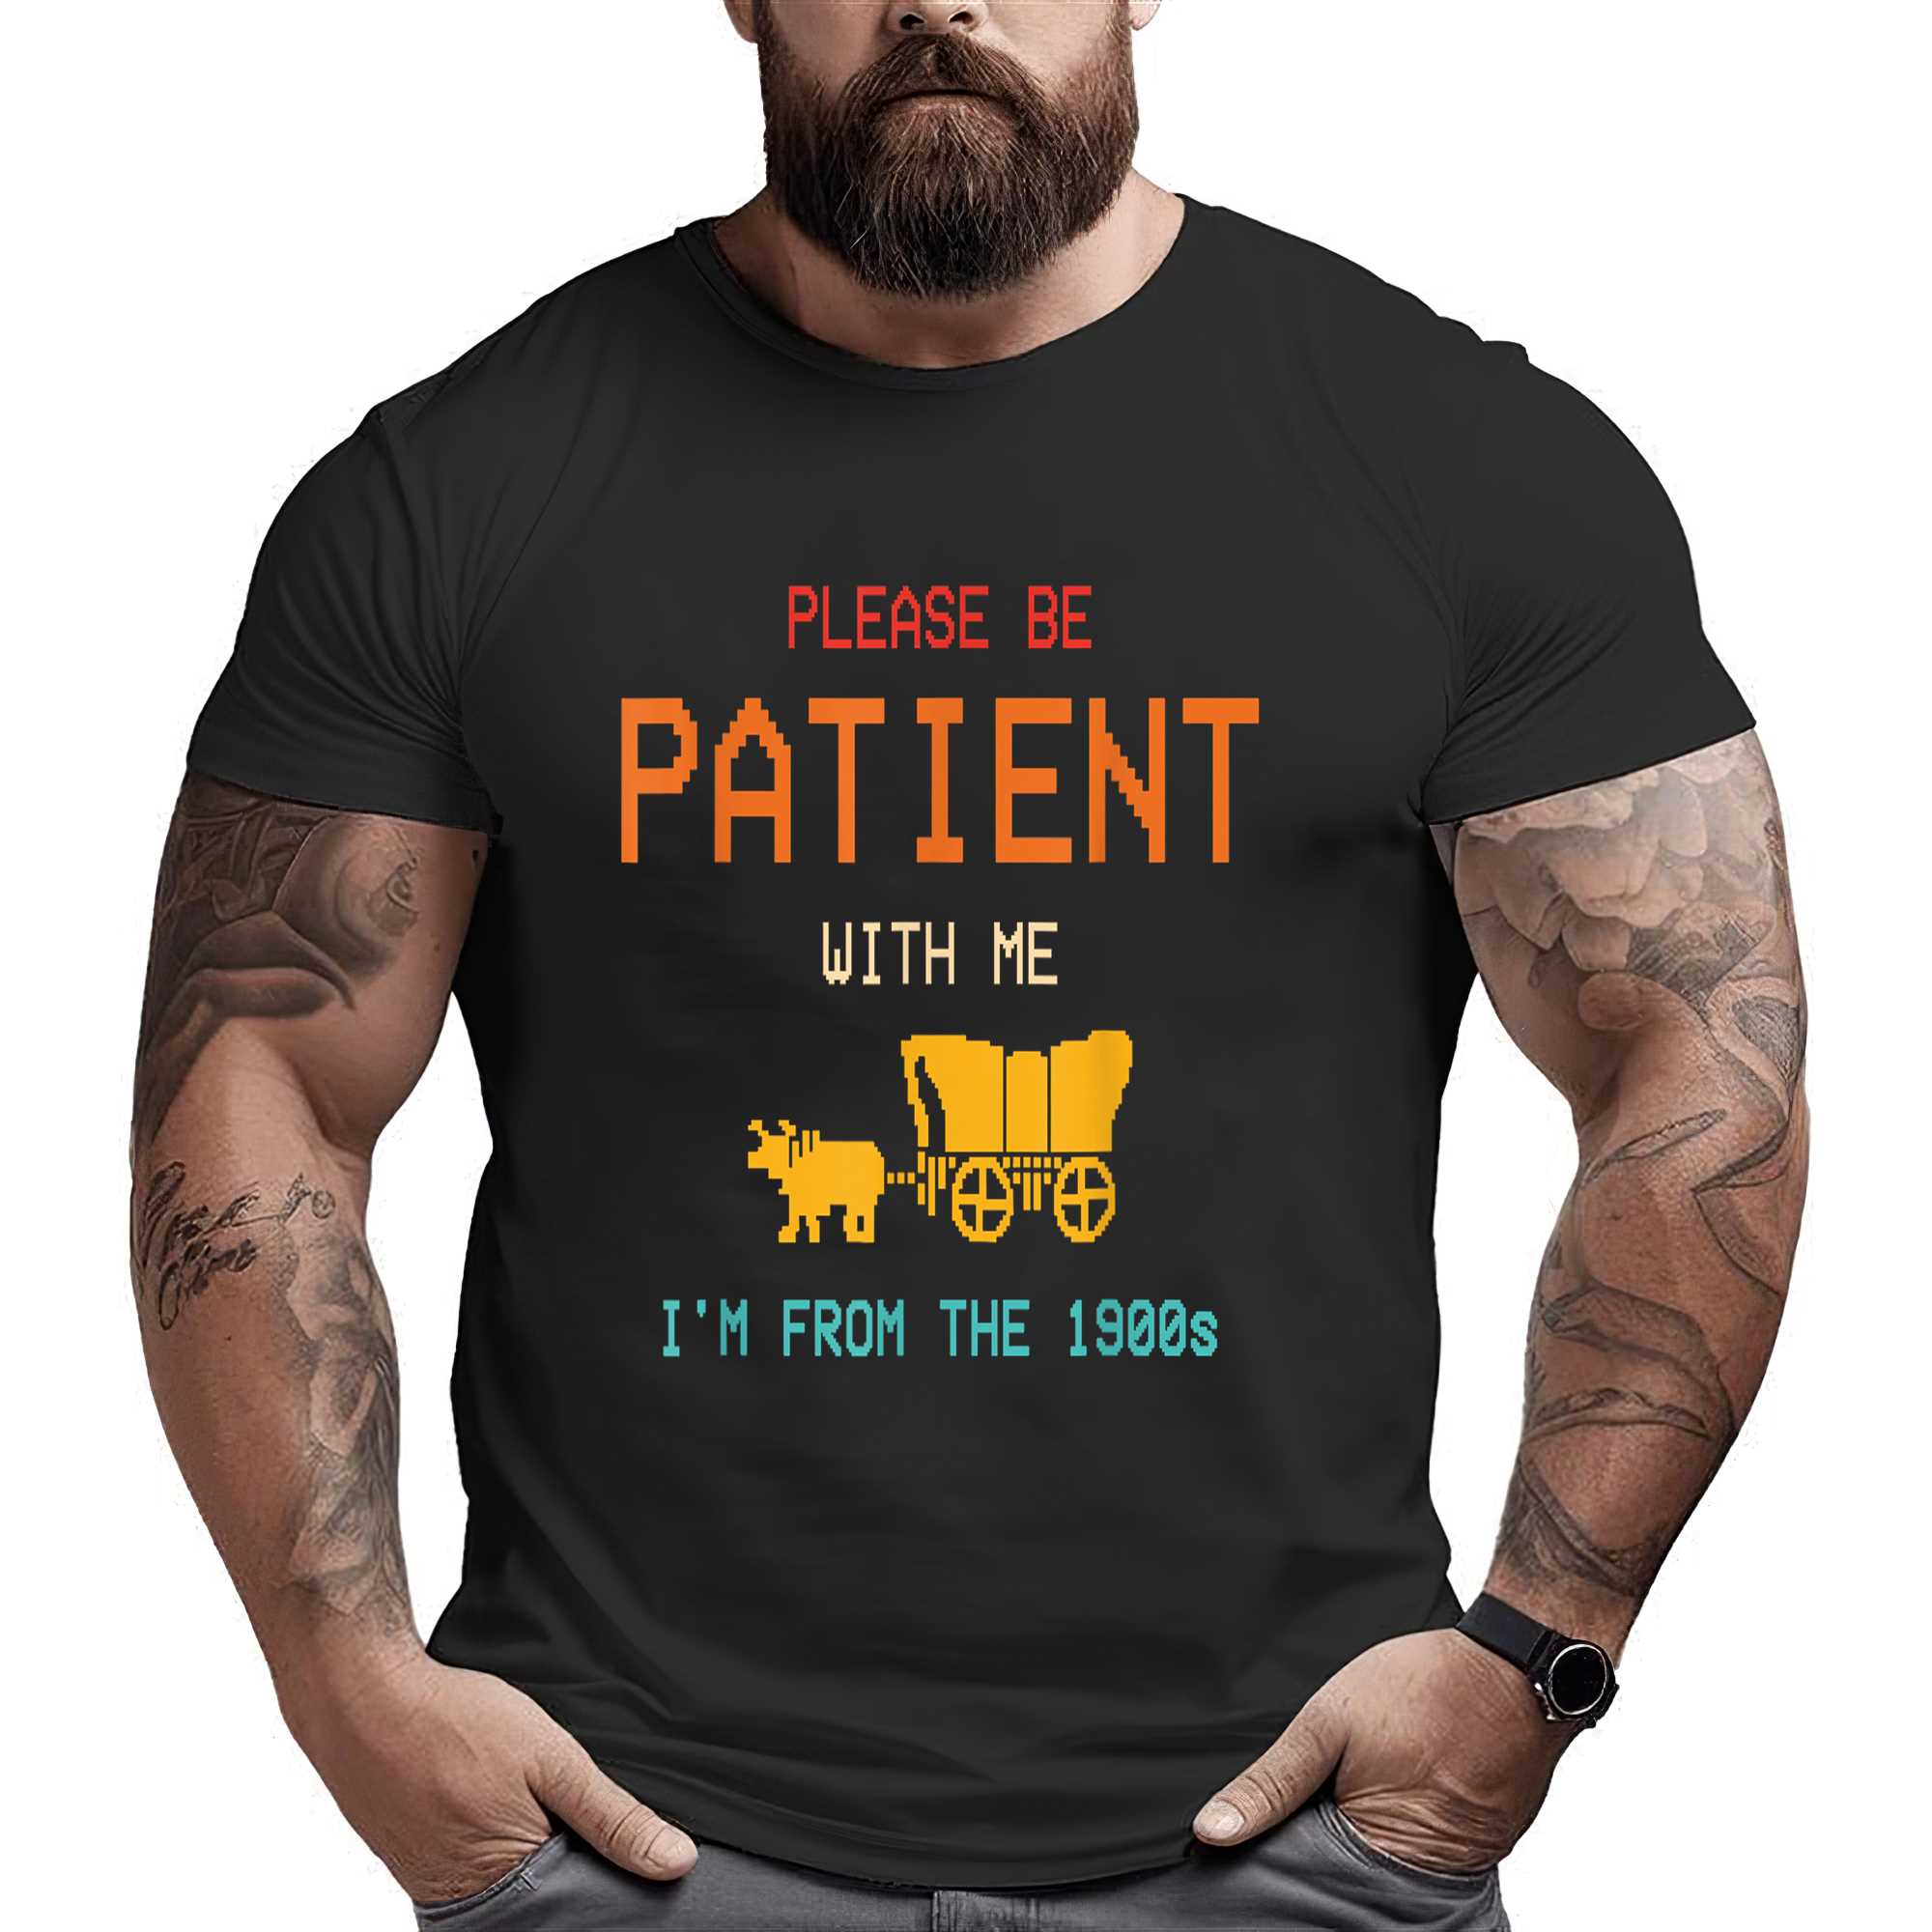 Please Be Patient With Me I’m From The 1900s Vintage T-shirt